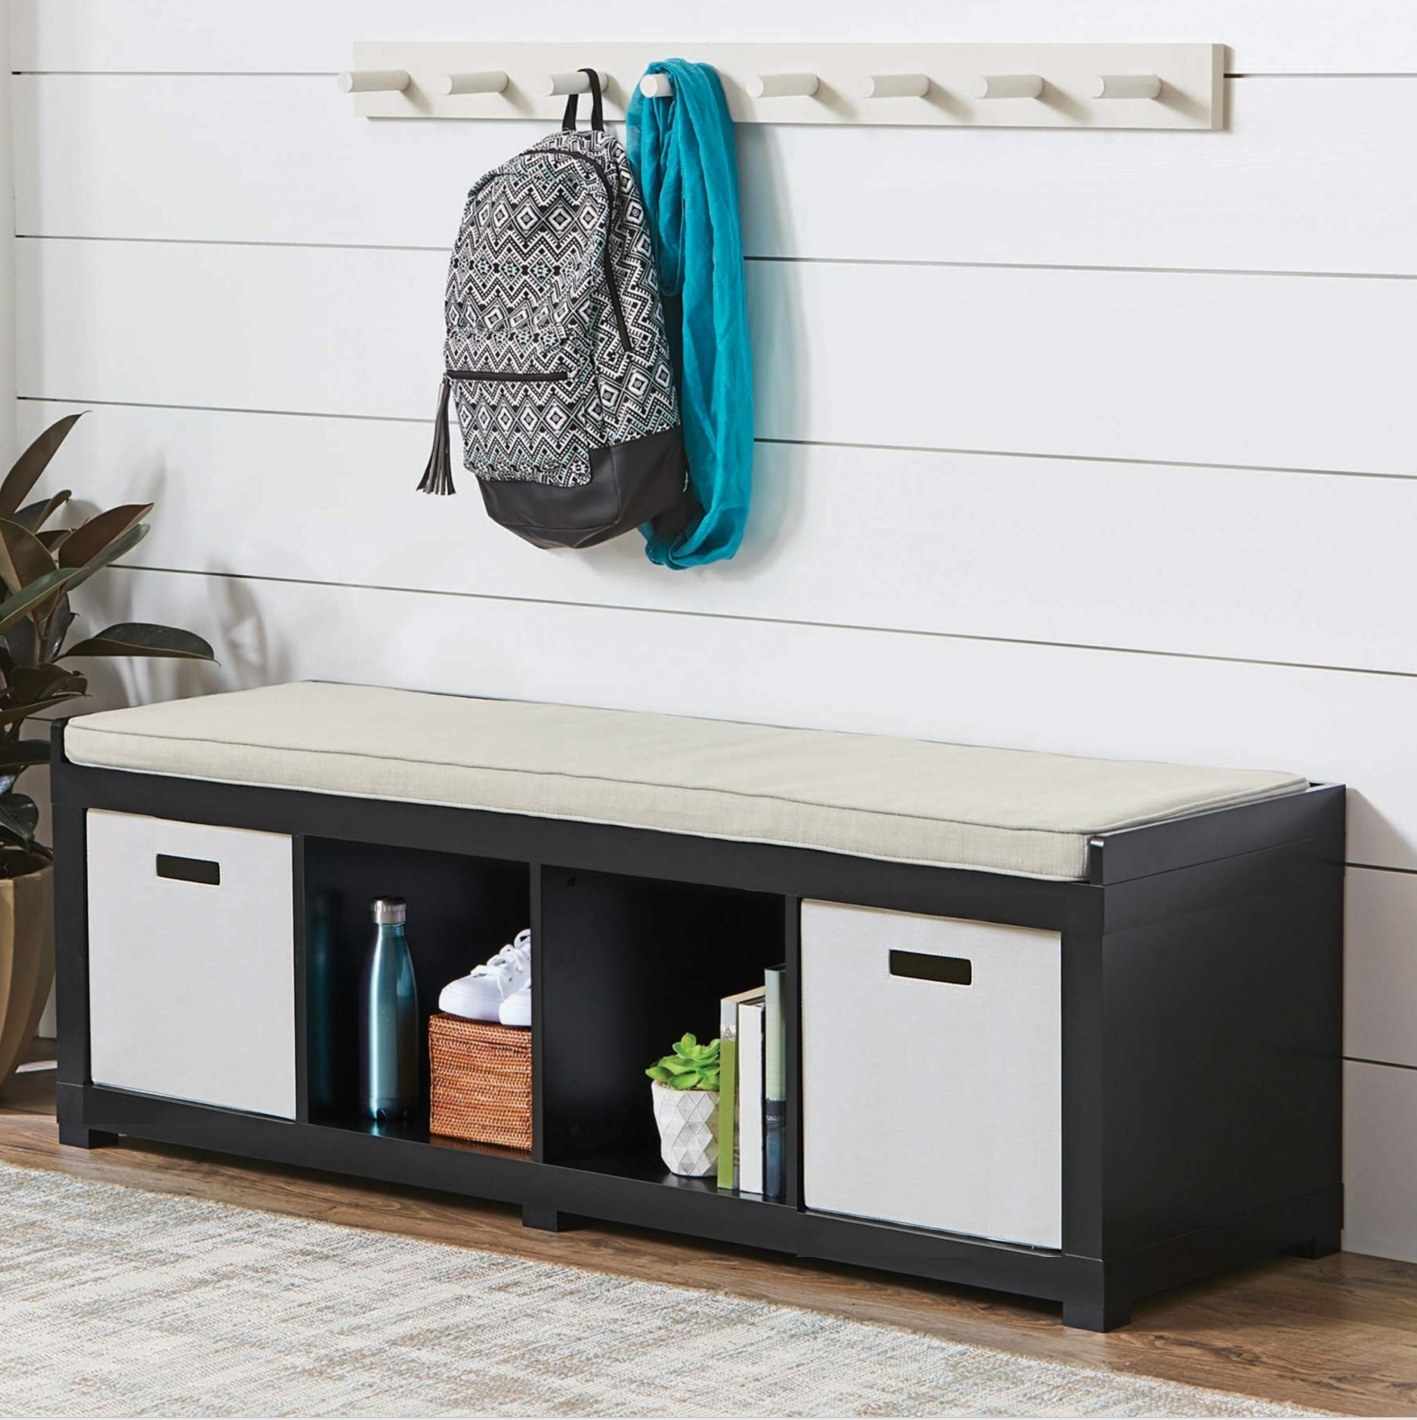 The cushioned bench has four storage cubes